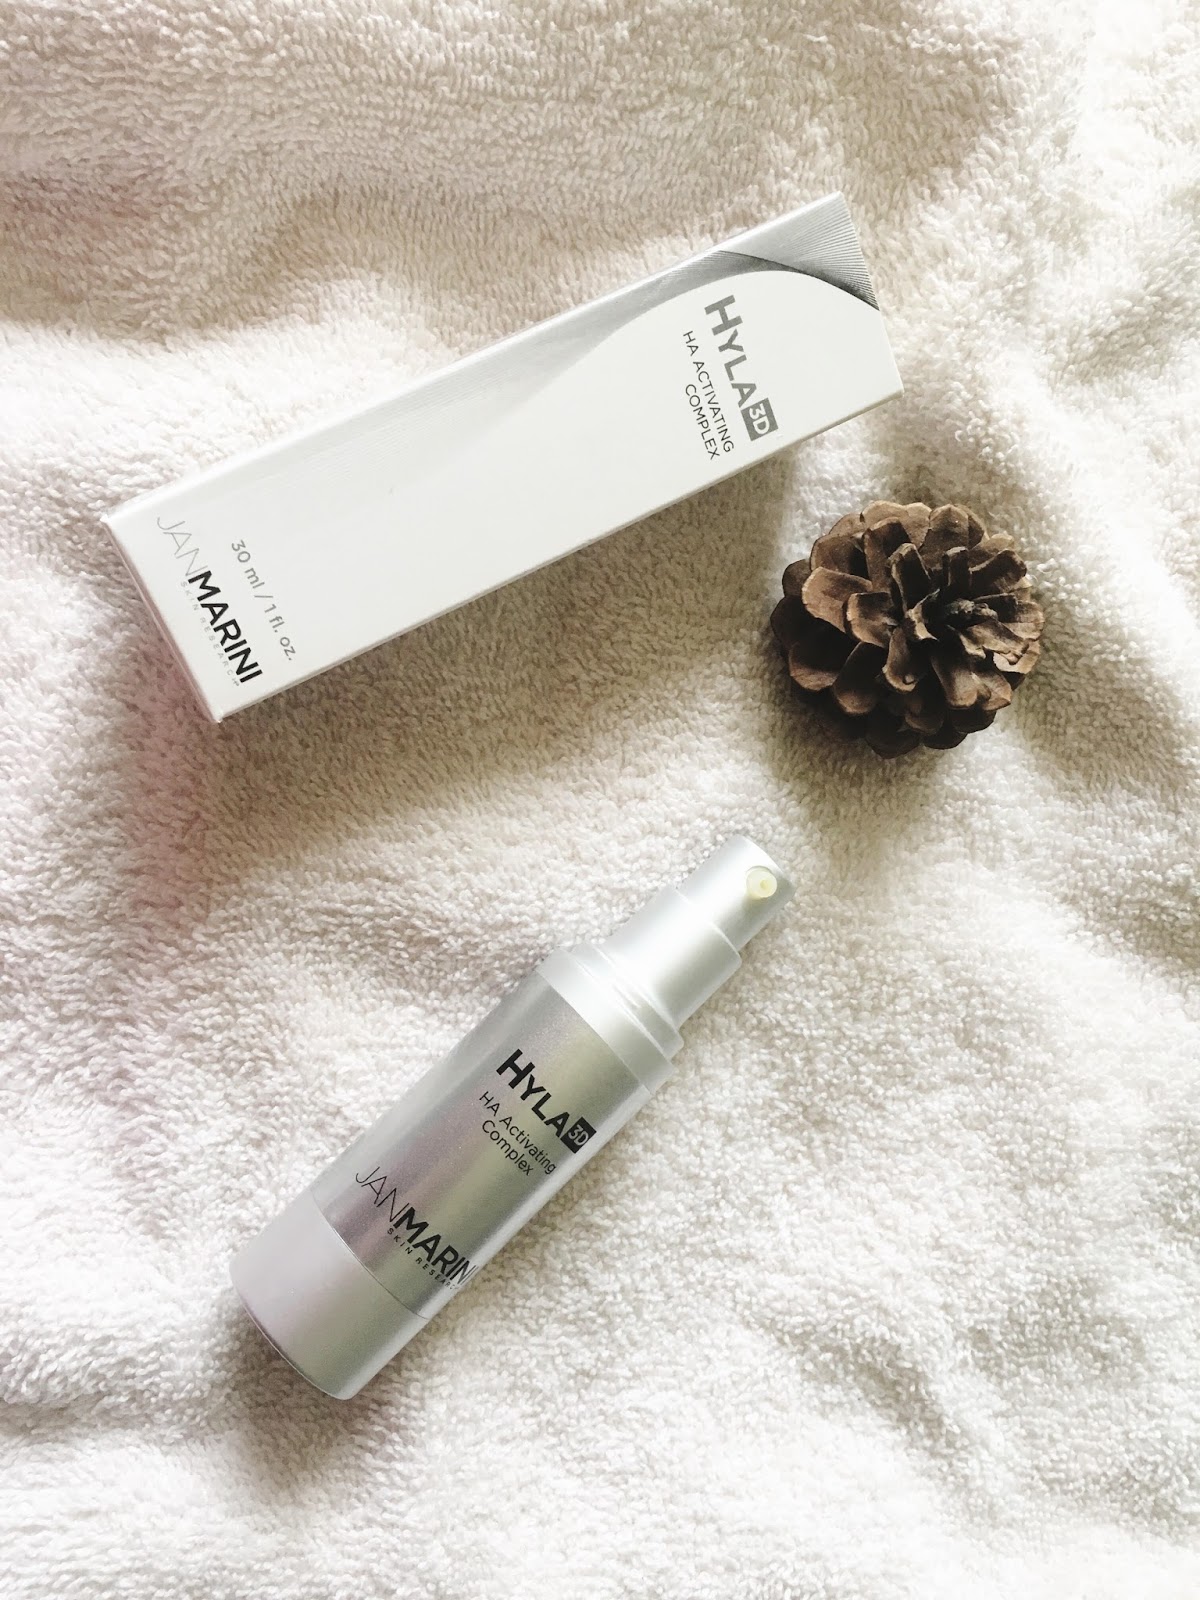 Jan Marini, Hyla 3D, Skincare, anti ageing, gel, cooling, product review